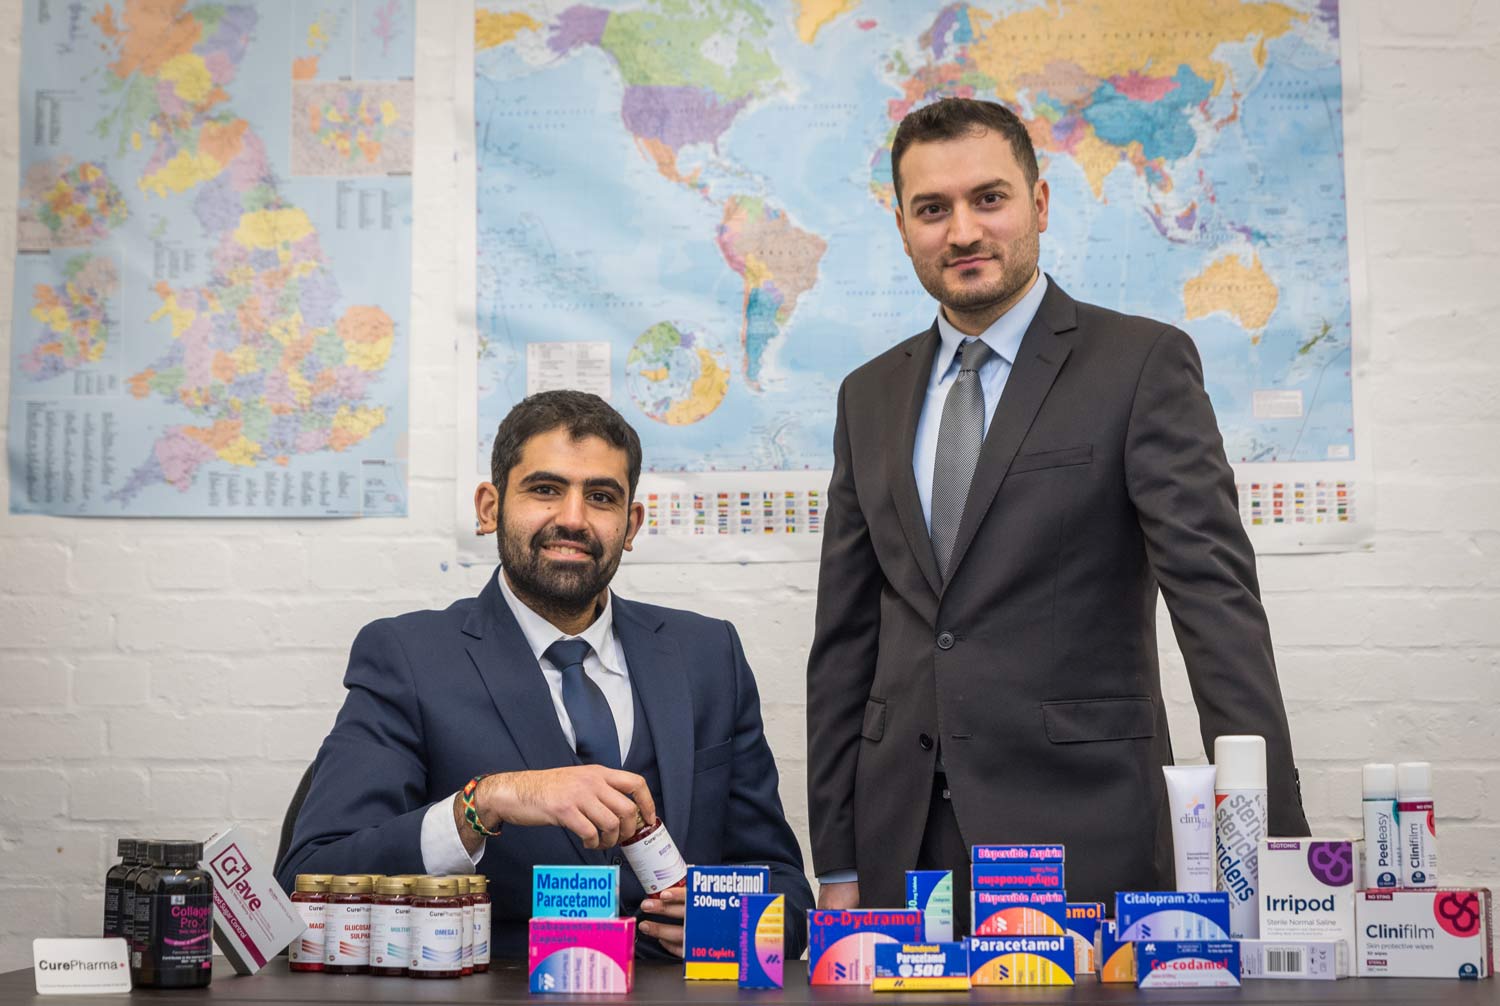 HEALTHY EXPORTS: CurePharma founders, director, Mustafa Al-Shalechy (left) and business development manager, Ali Alshamari, who have opened an office in Doha, Qatar, after helping to export £500,000 worth of medicines and pharmaceuticals to The Middle East in 2017